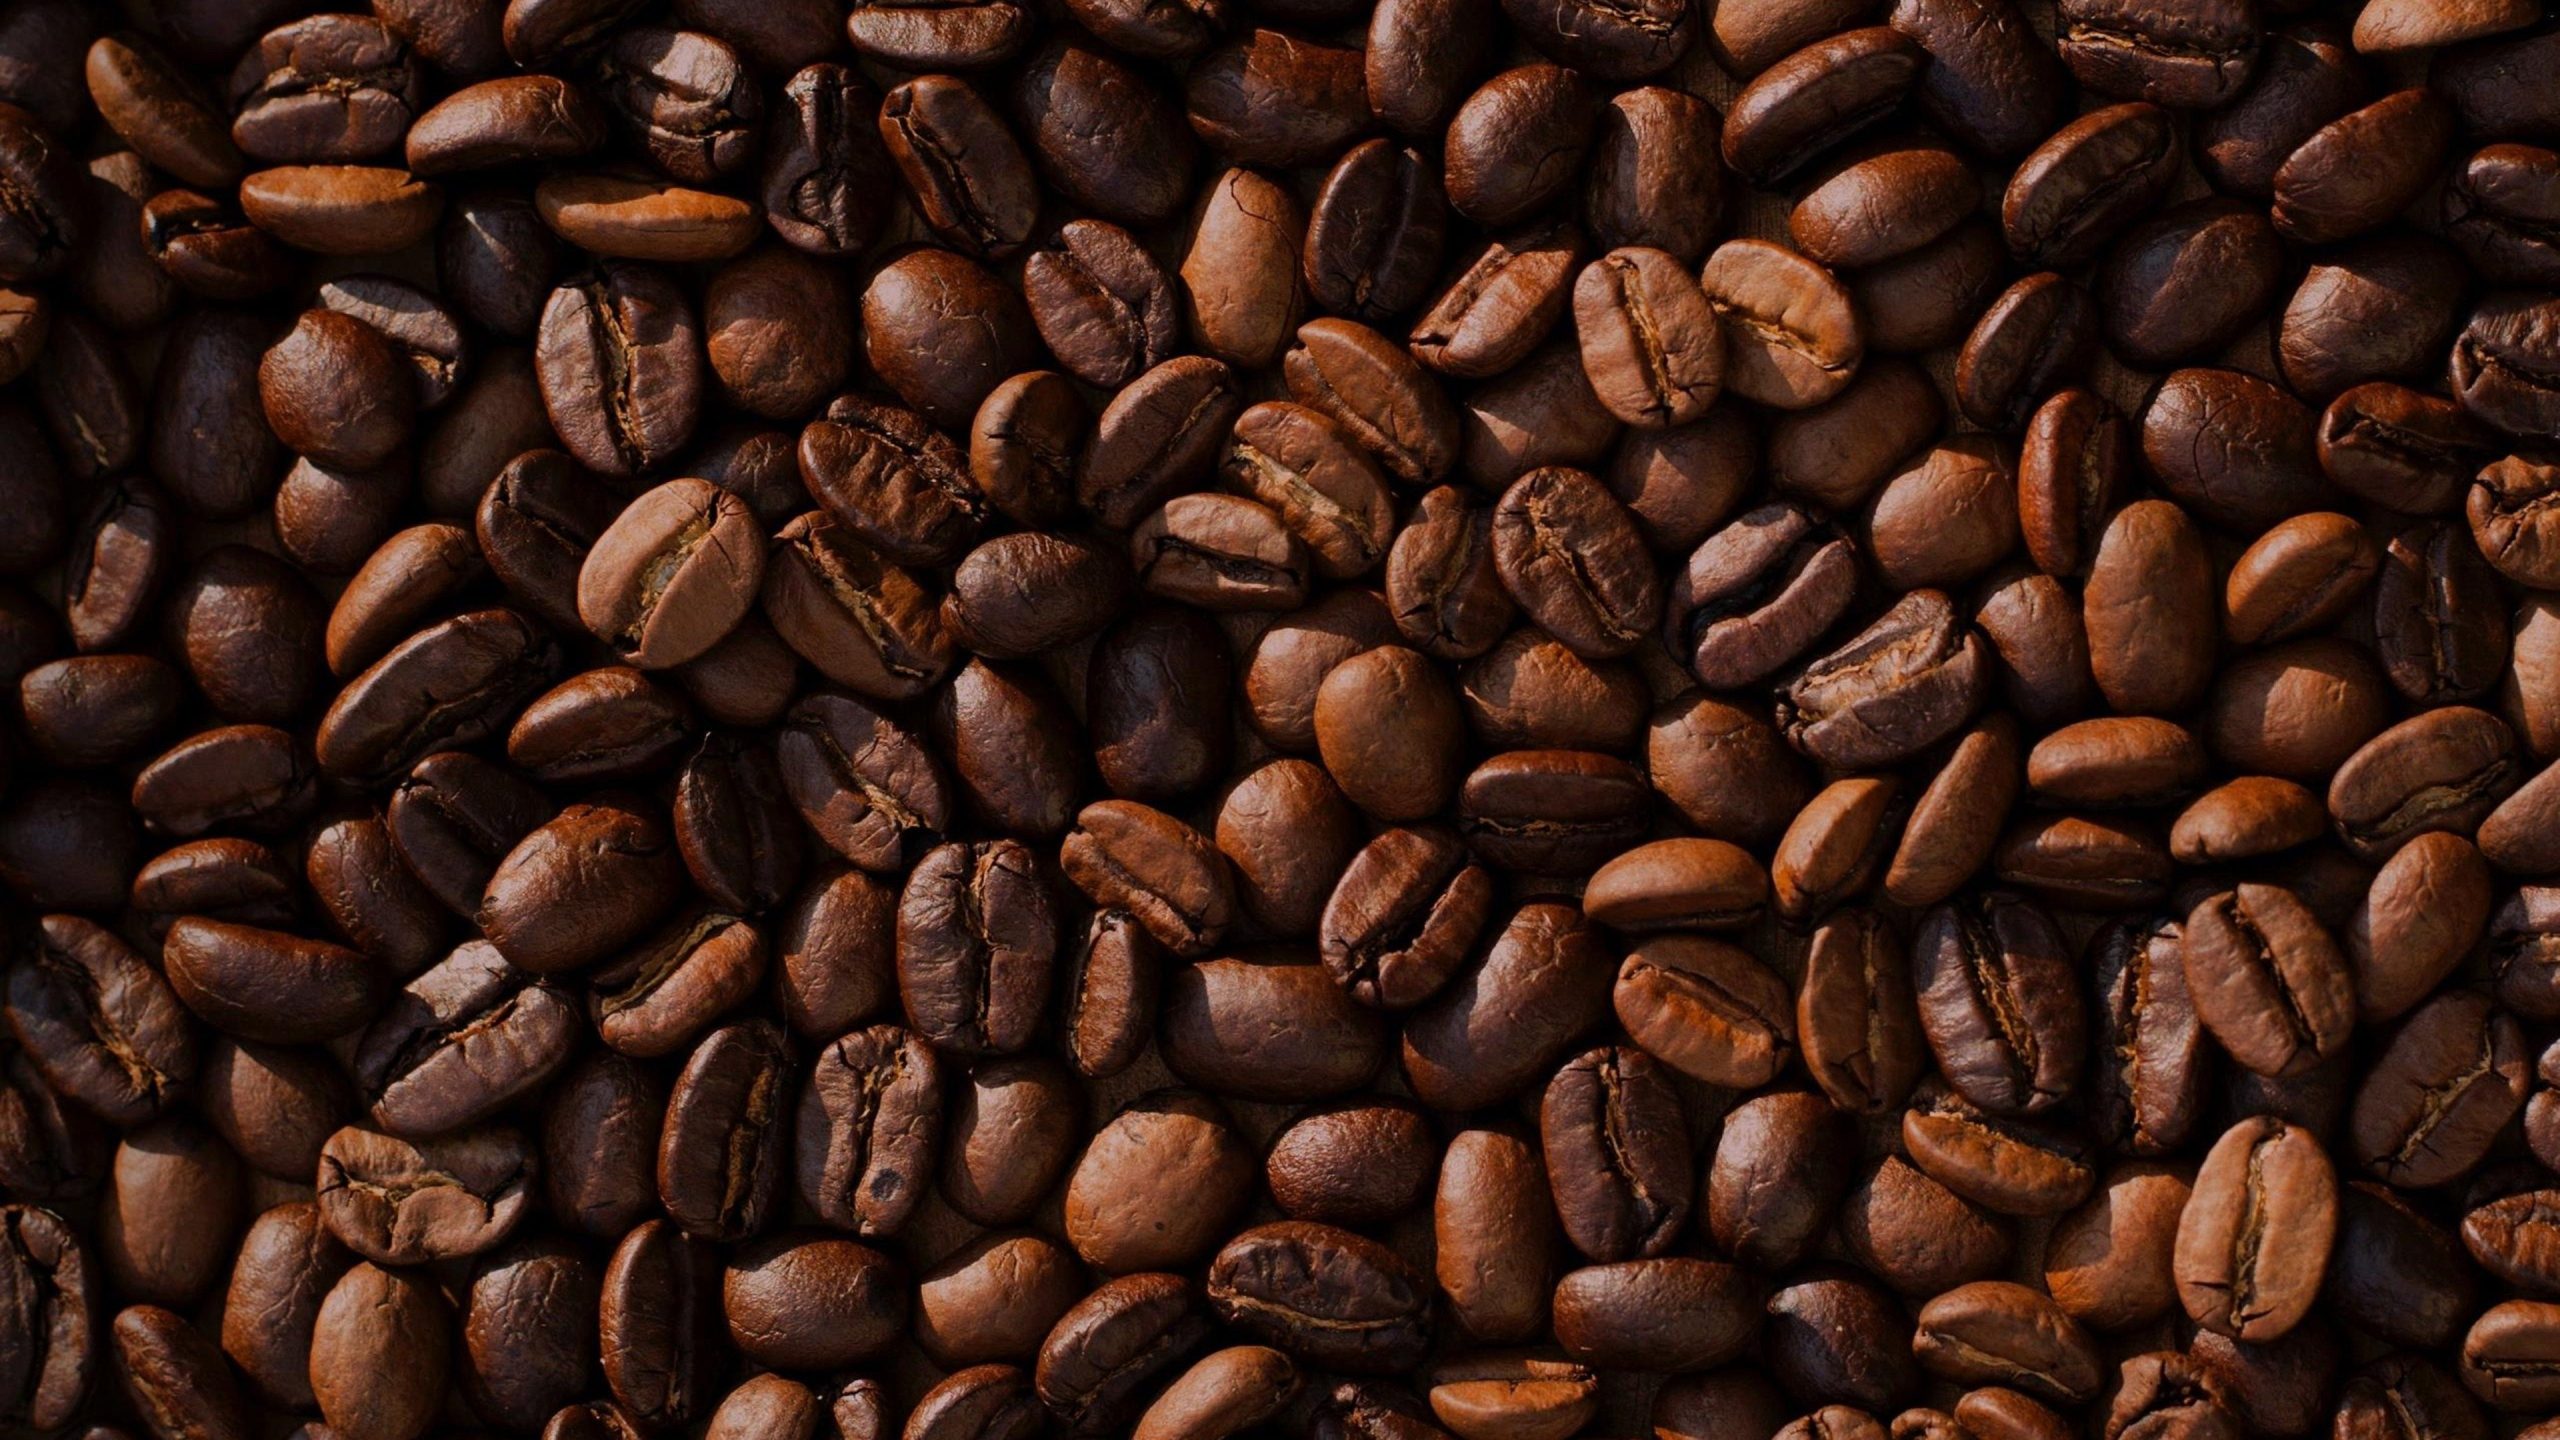 The history of coffee: where it originated, its uses